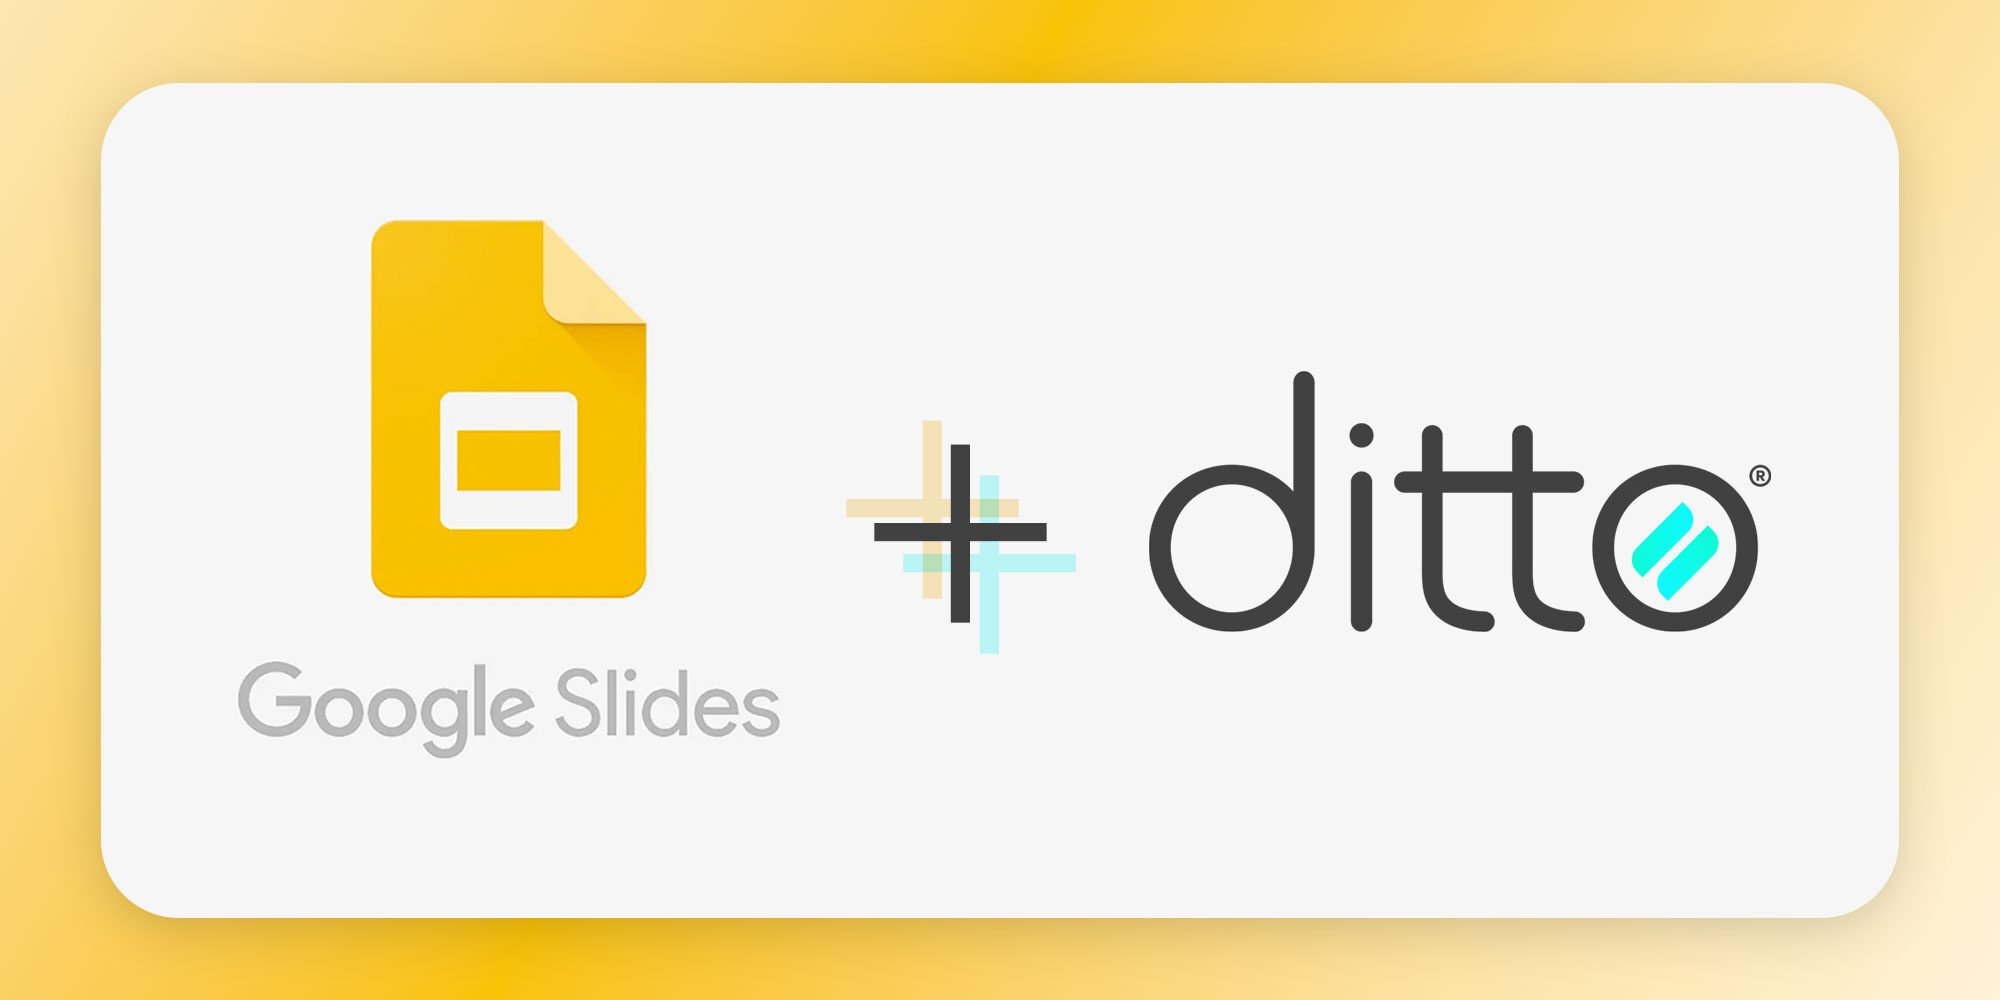 Ditto Launches Google Slides Integration for Digital Signage - Featured Image